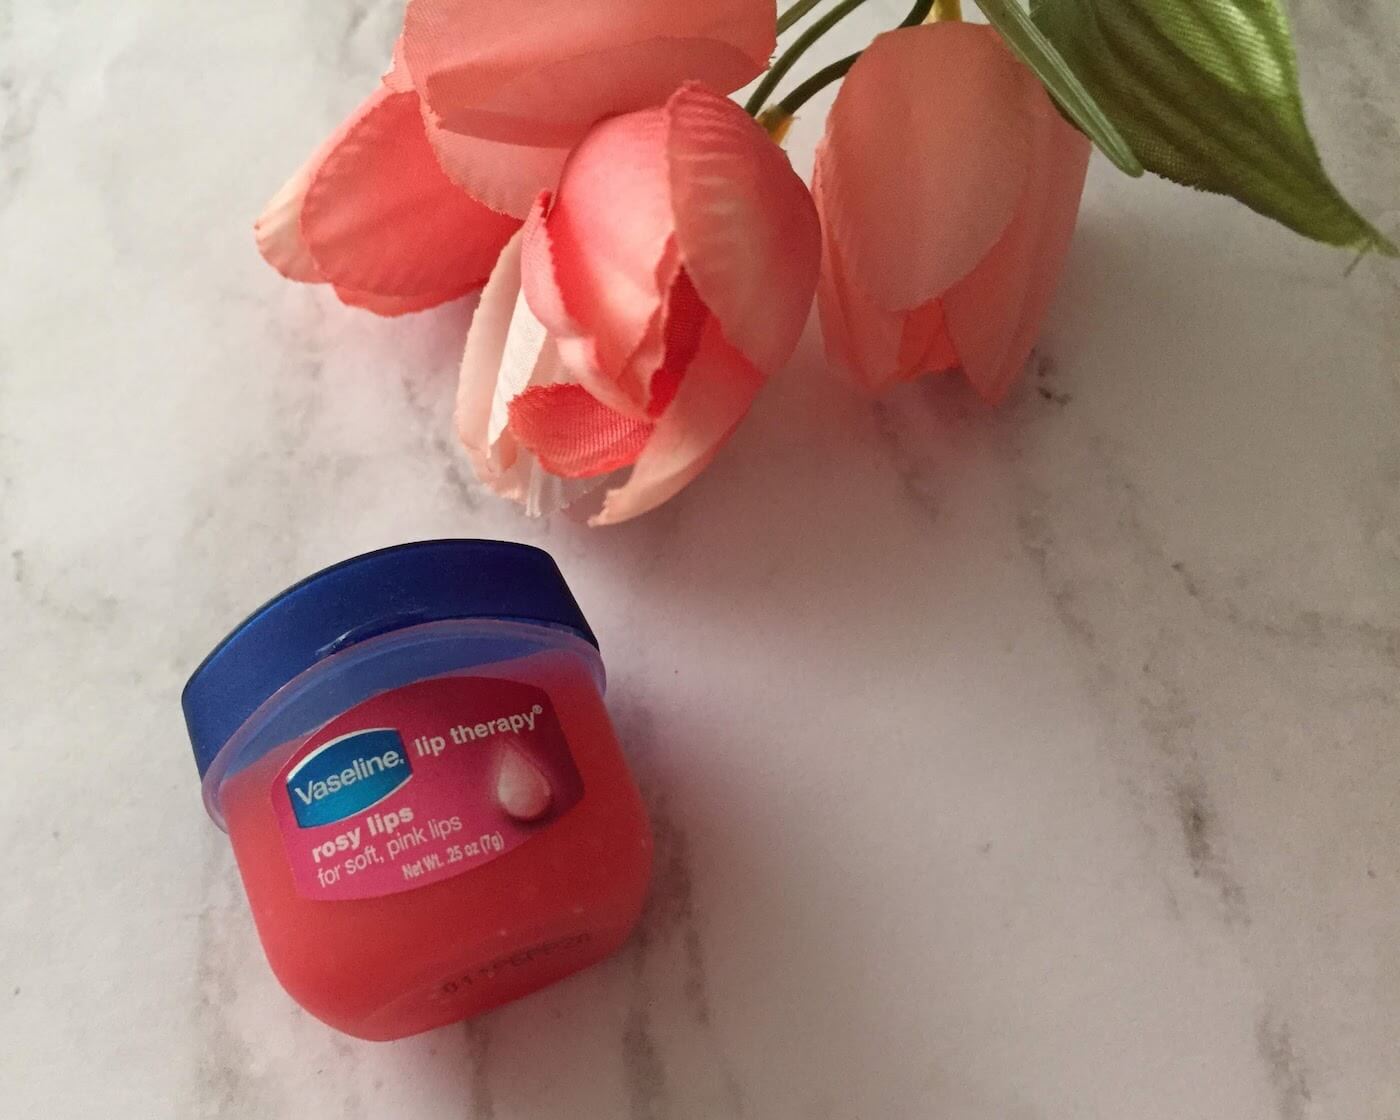 vaseline lip therapy rosy lips review